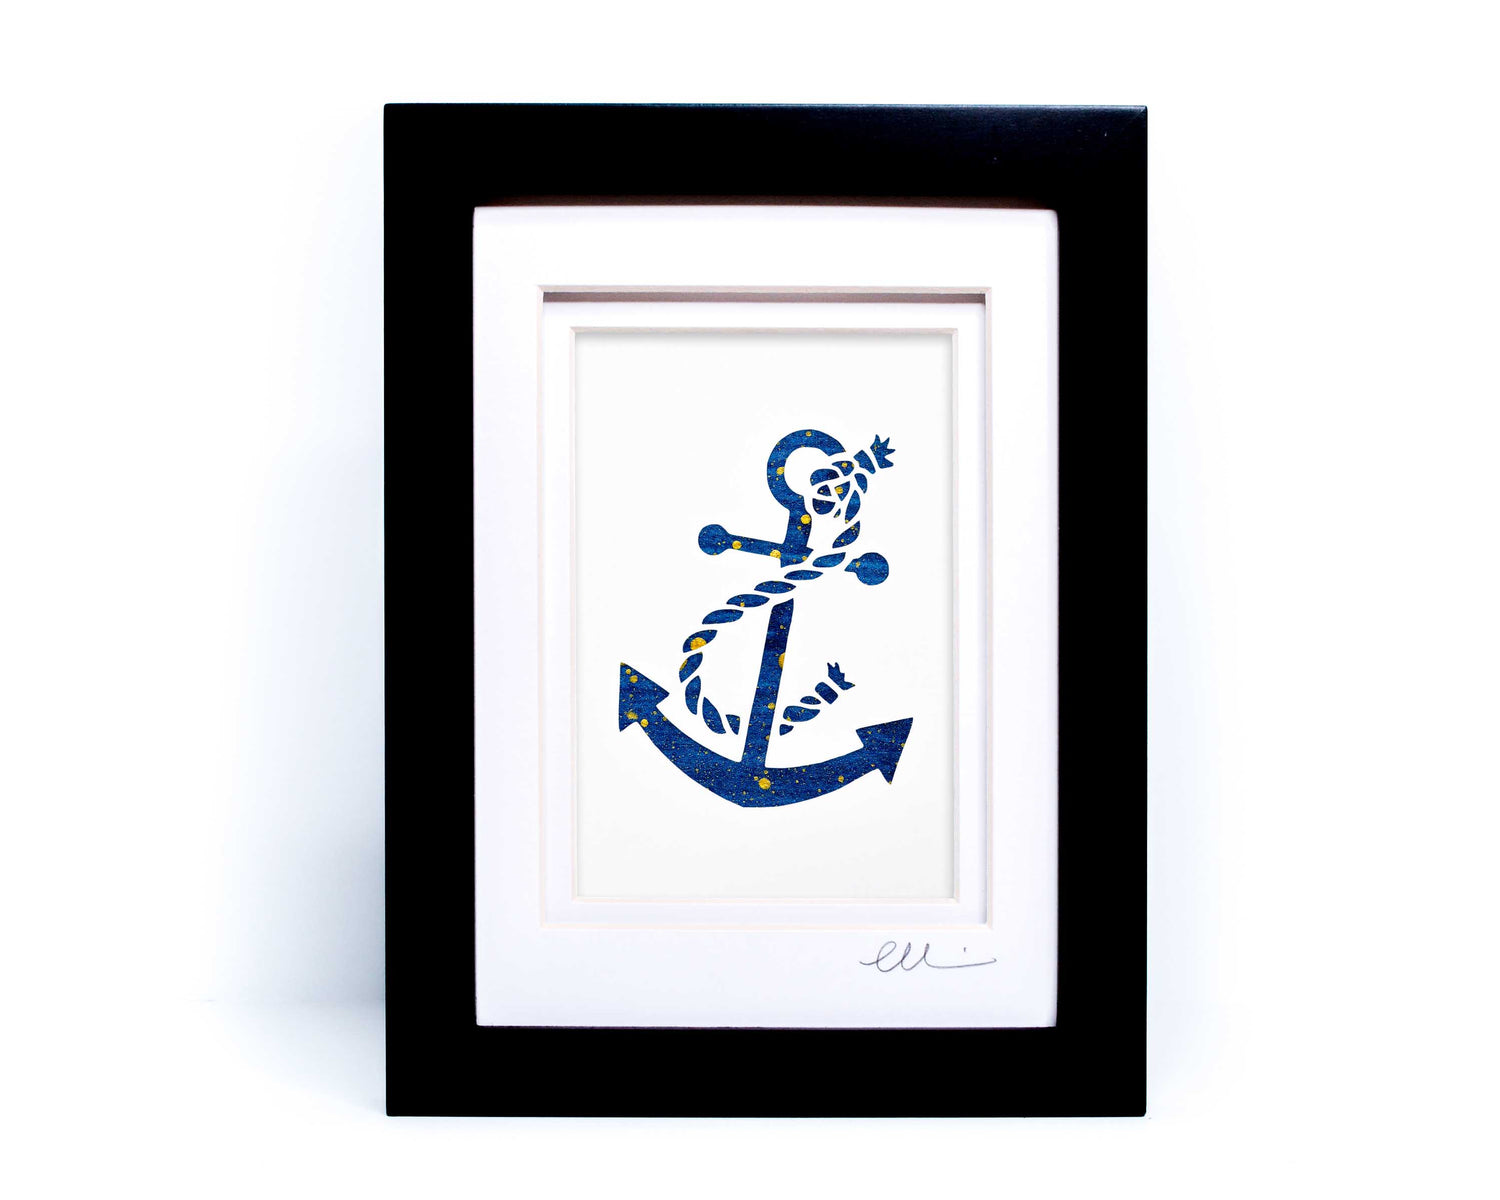 White nautical anchor twisted with rope papercut on hand painted dark blue background.